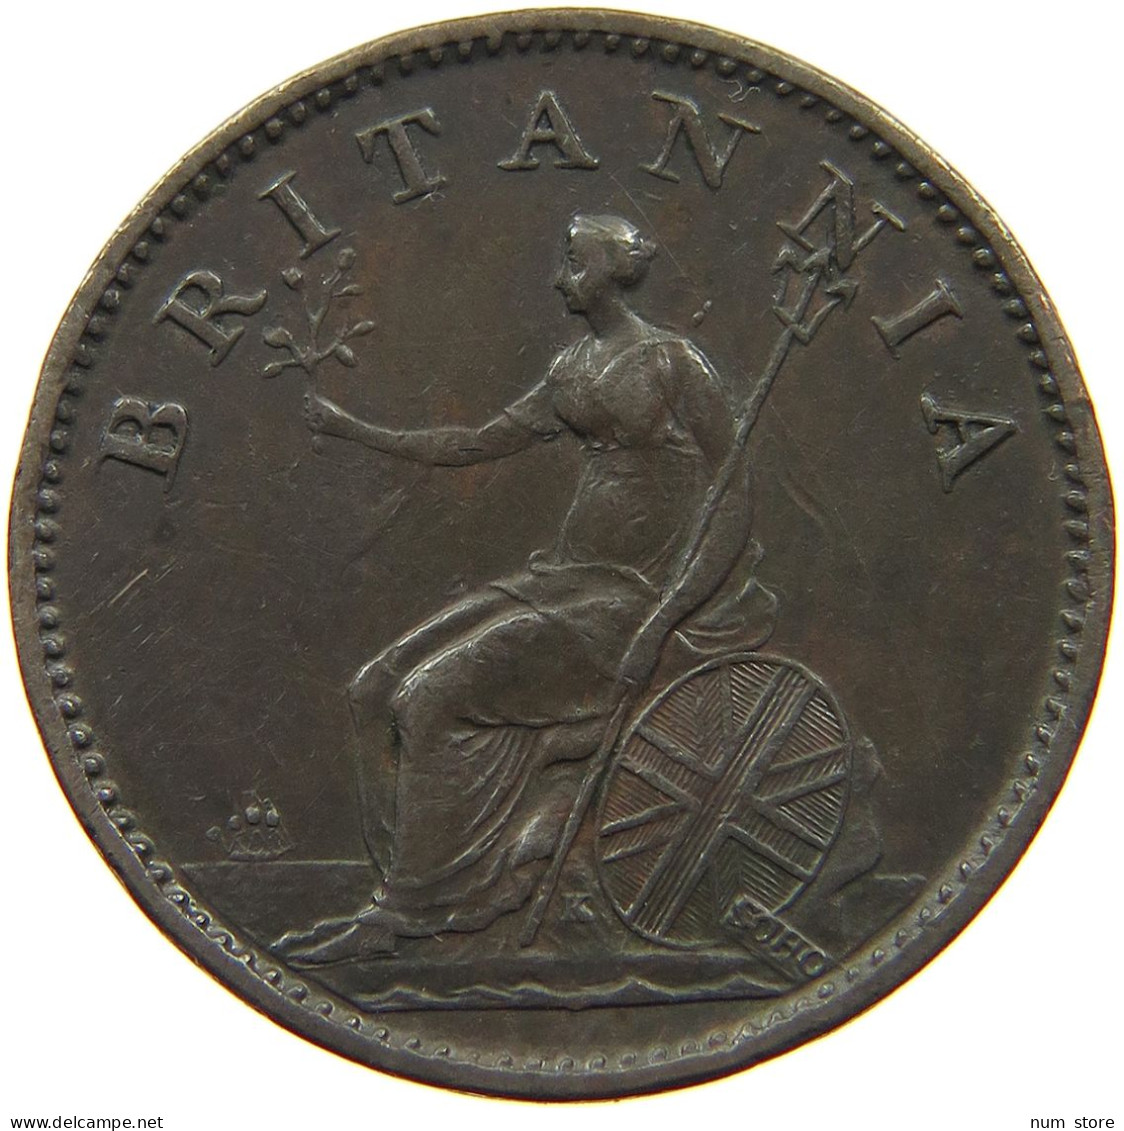 GREAT BRITAIN FARTHING 1806 SOHO GEORGE III. 1760-1820 #t073 0023 - A. 1 Farthing